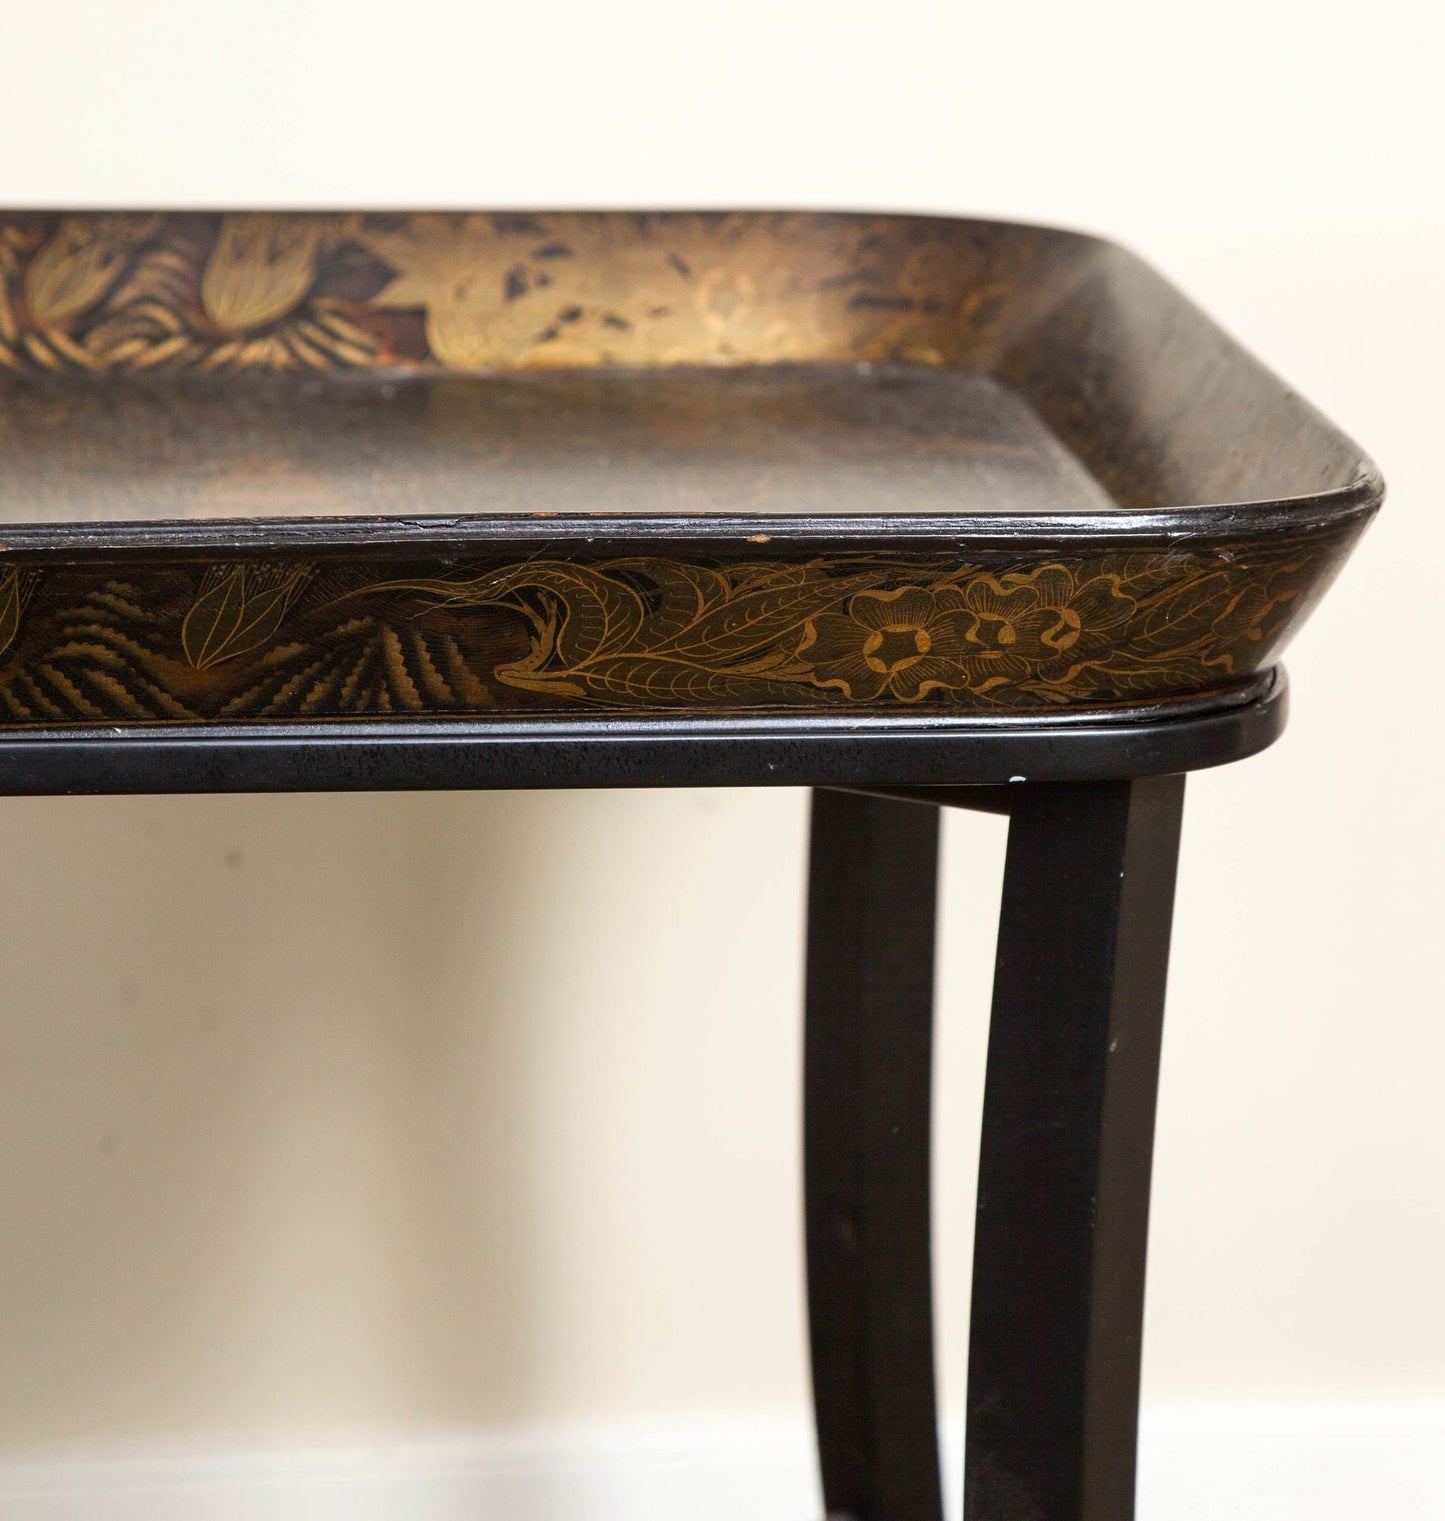 Regency Black and Gilt Papier Mache Lacquer Tray with Later Stand, 19th Century